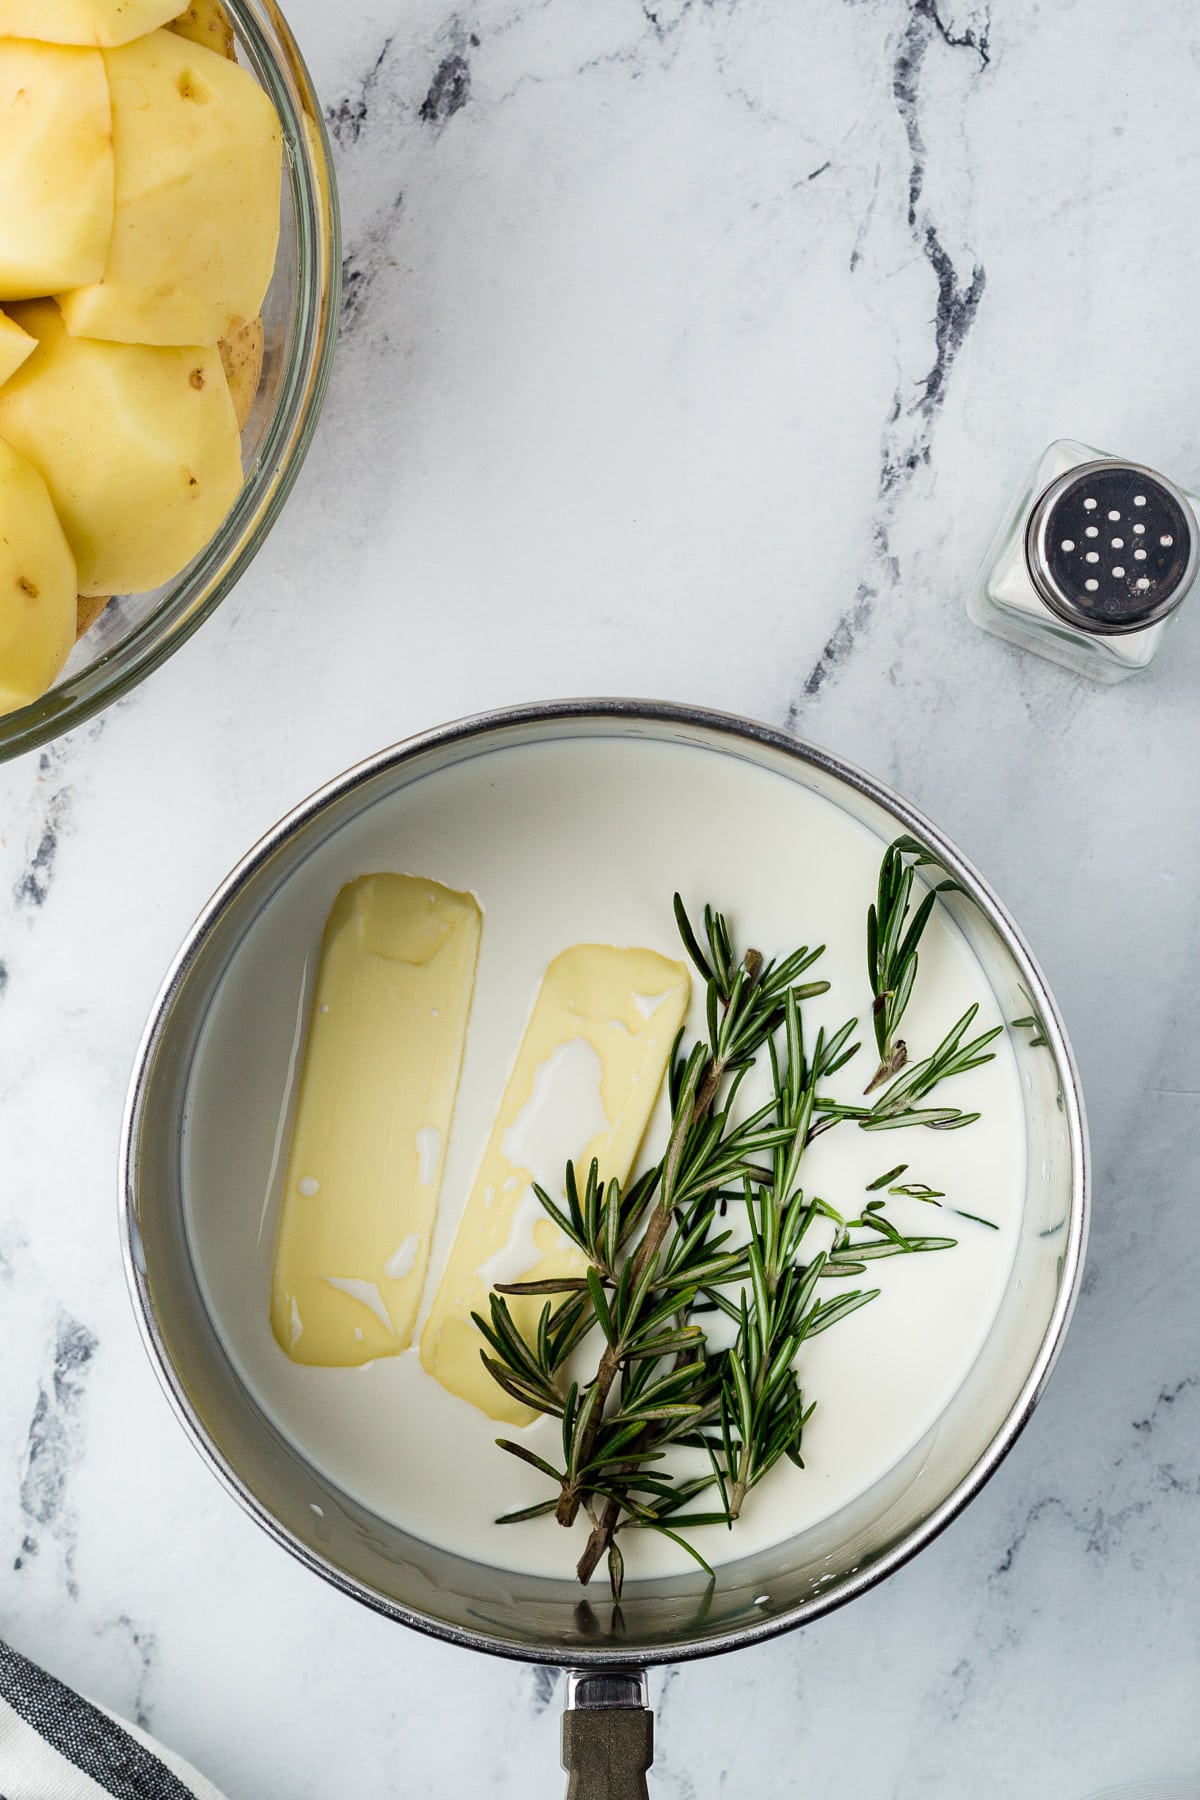 A pan with butter, rosemary, and cream on a marble countertop.